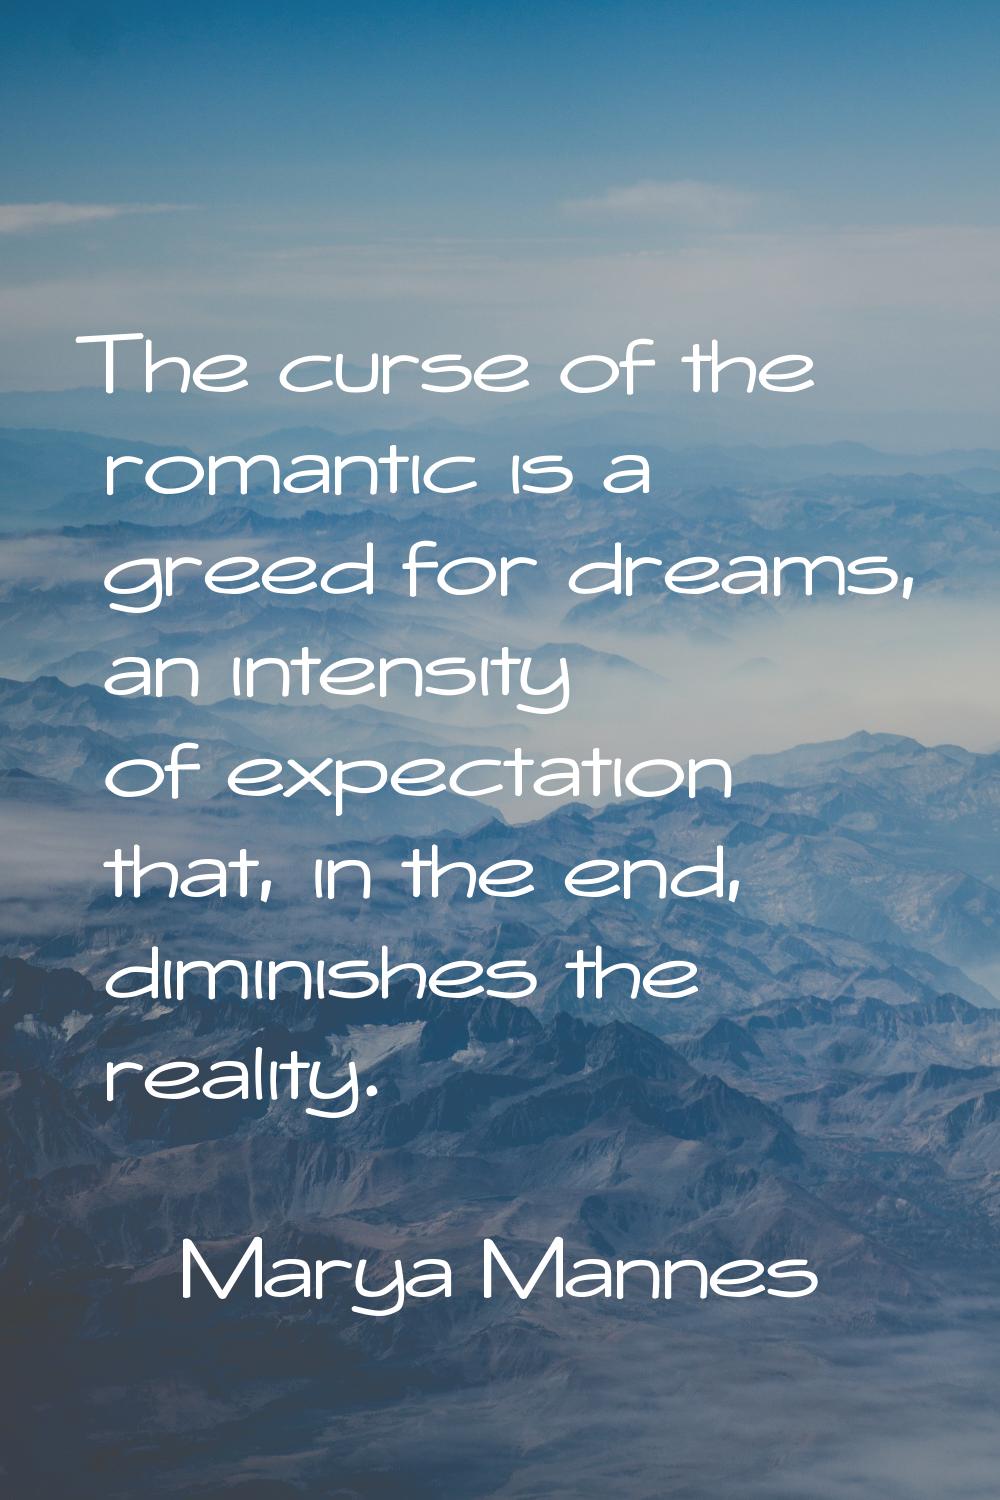 The curse of the romantic is a greed for dreams, an intensity of expectation that, in the end, dimi